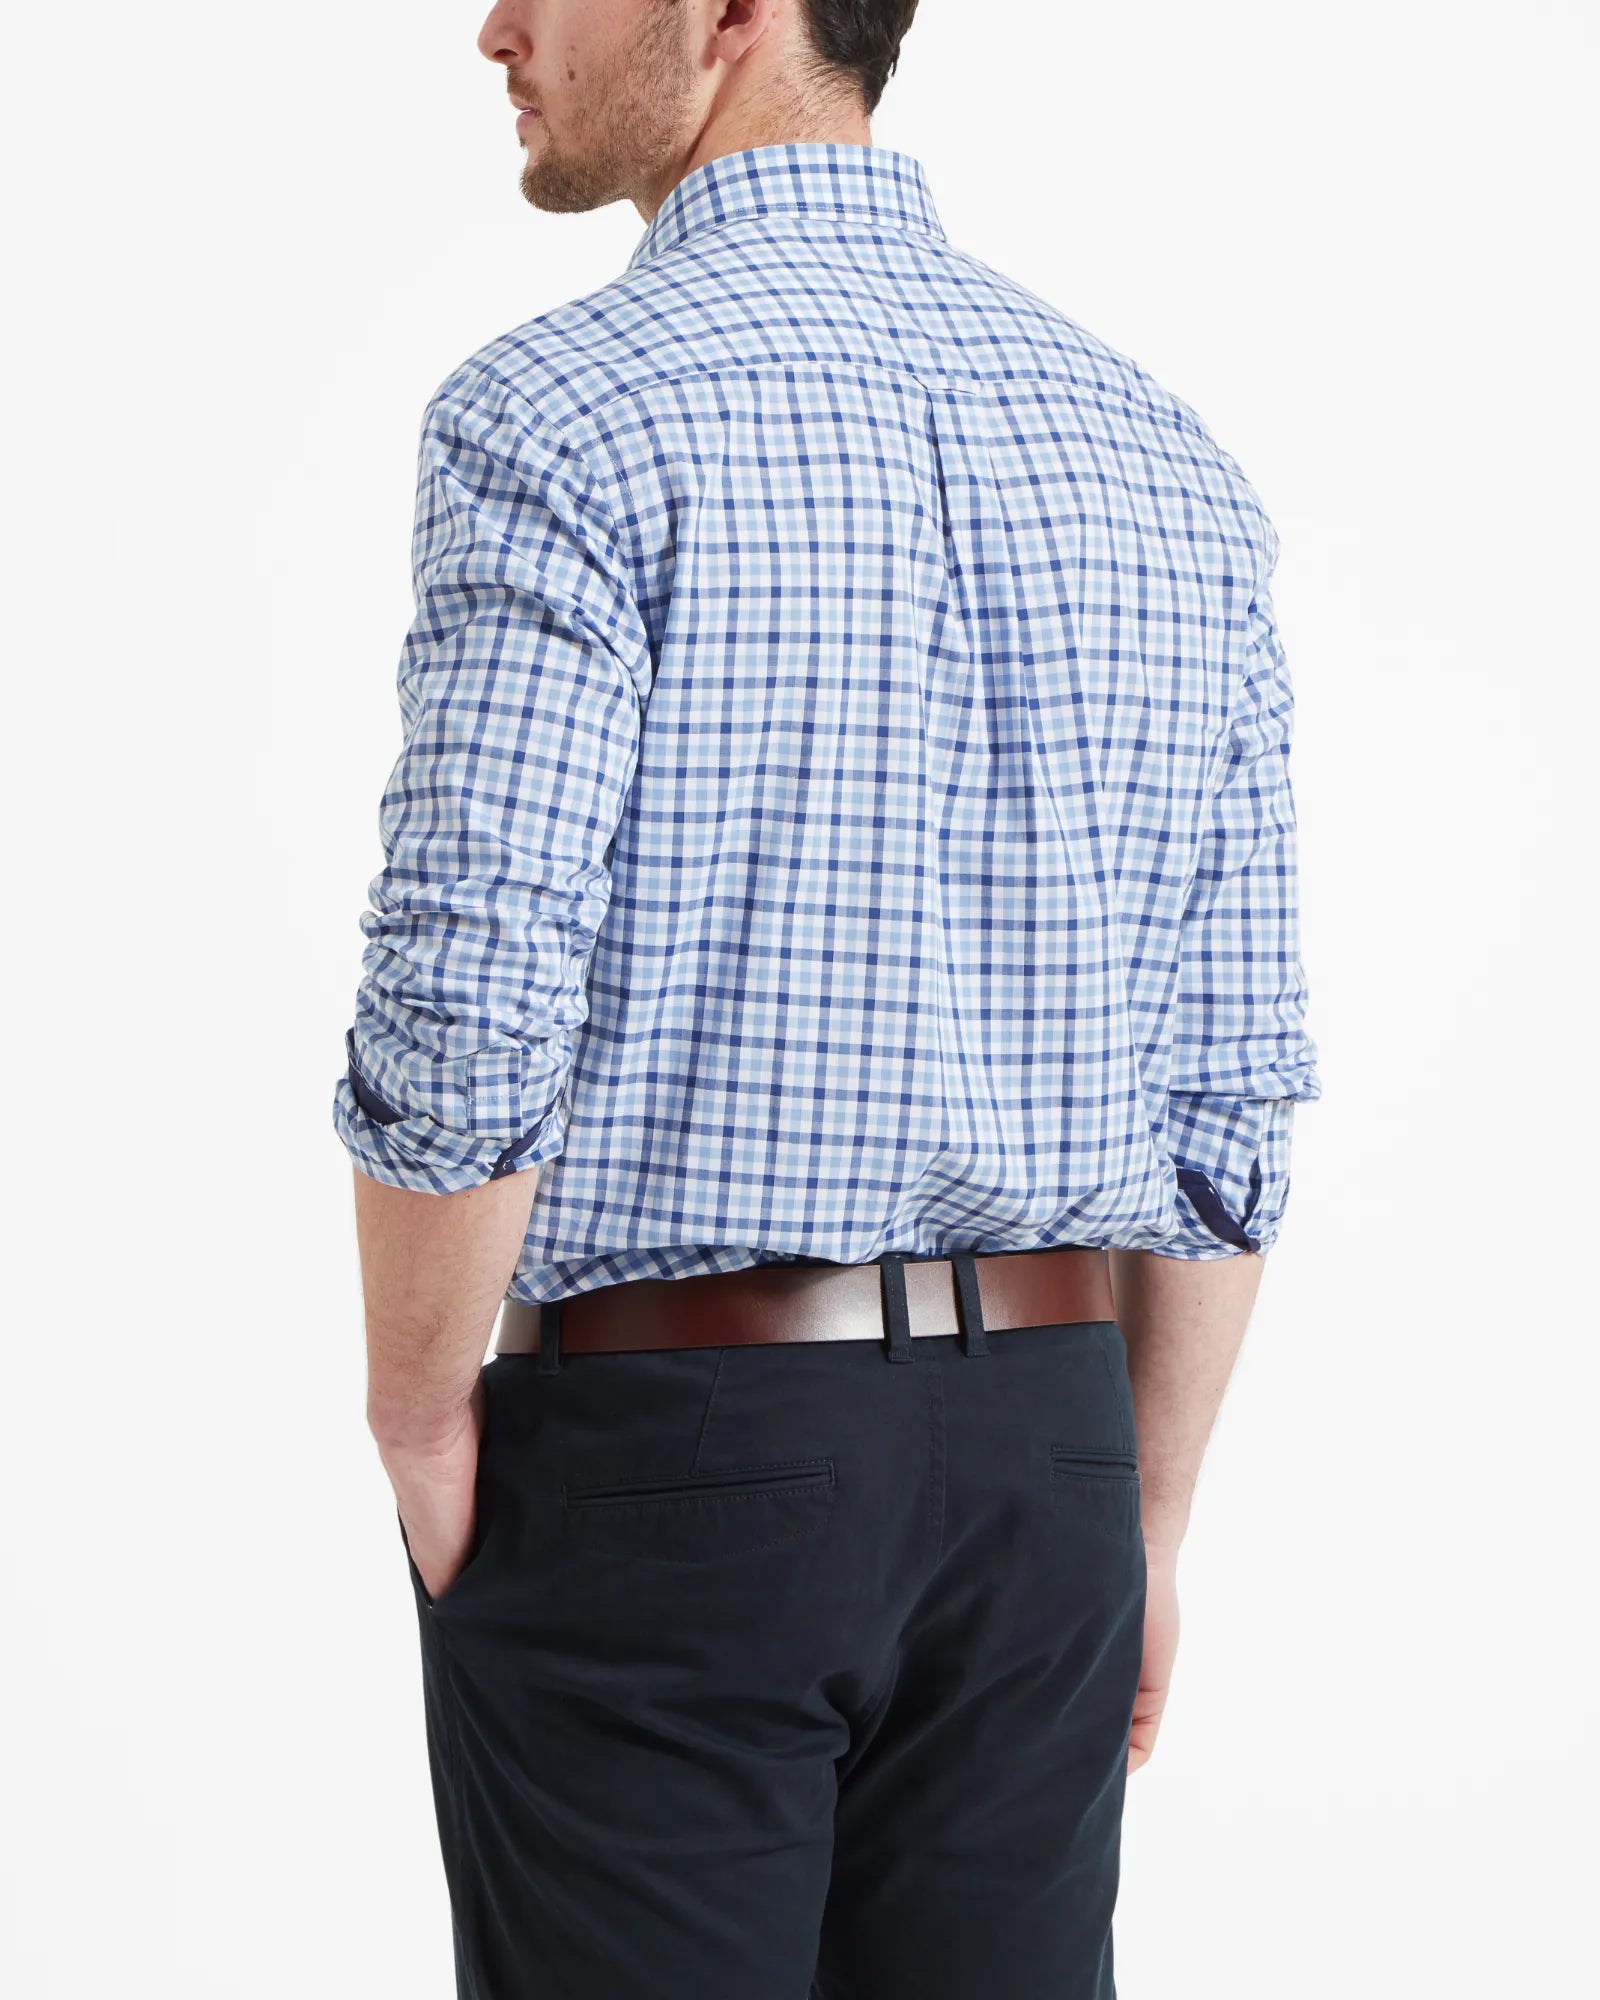 Hebden Tailored Shirt - French Navy/Sky Blue Check